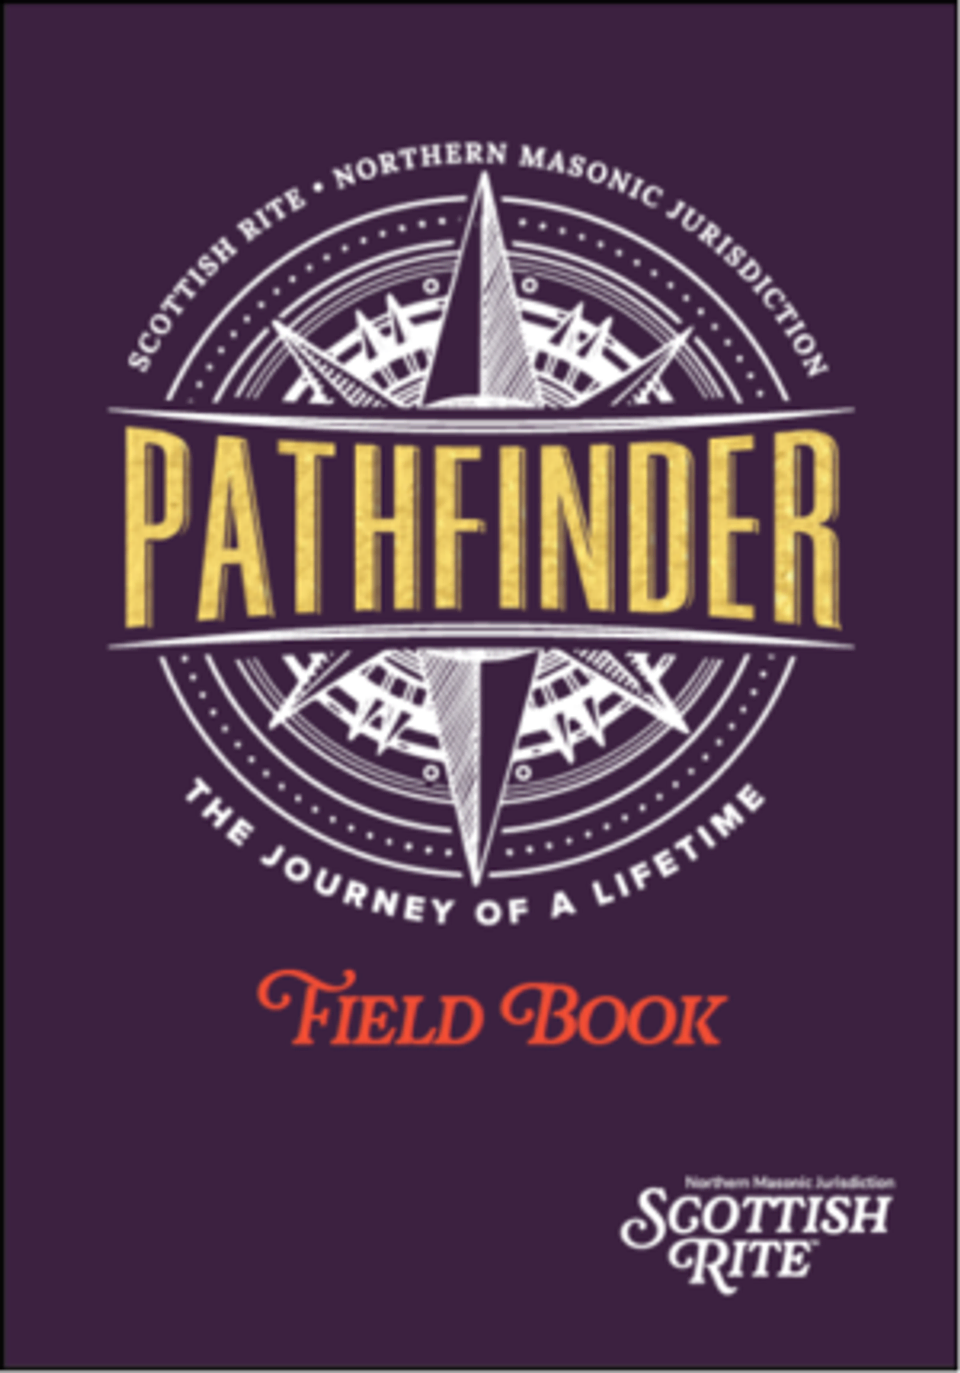 The cover of the Pathfinder Field Book